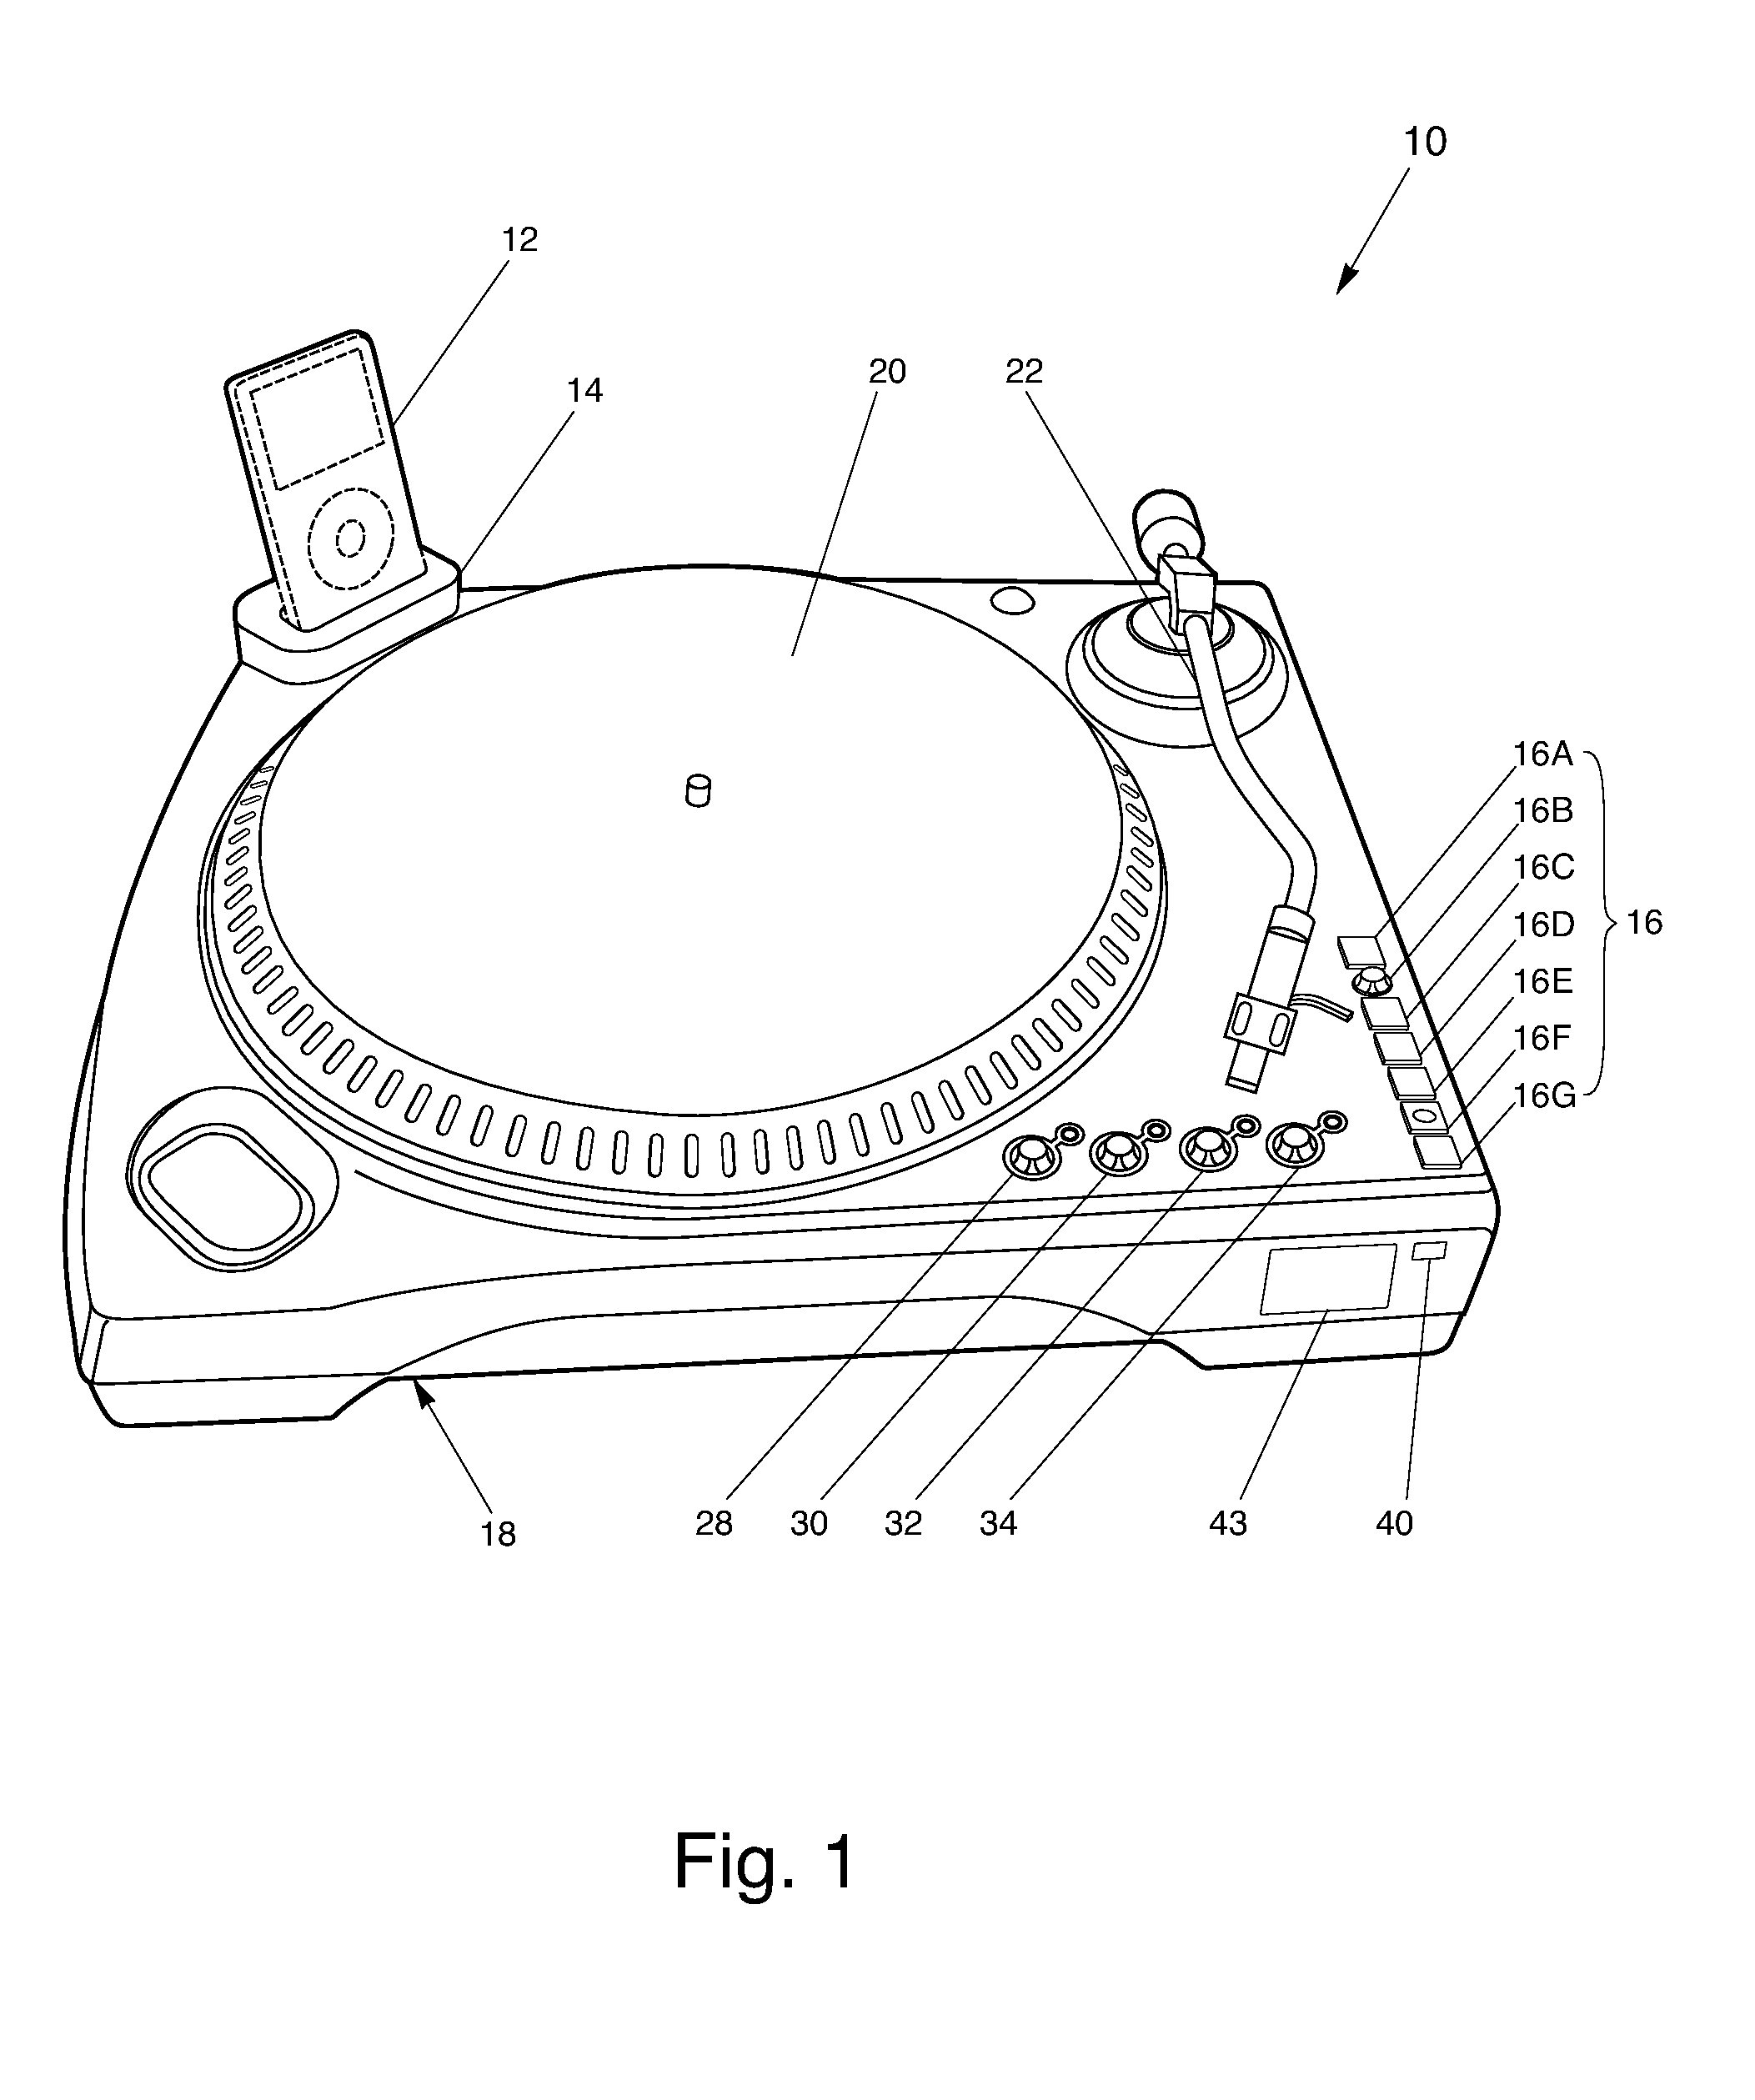 Vinyl record turntable having integrated docking station for a portable media player